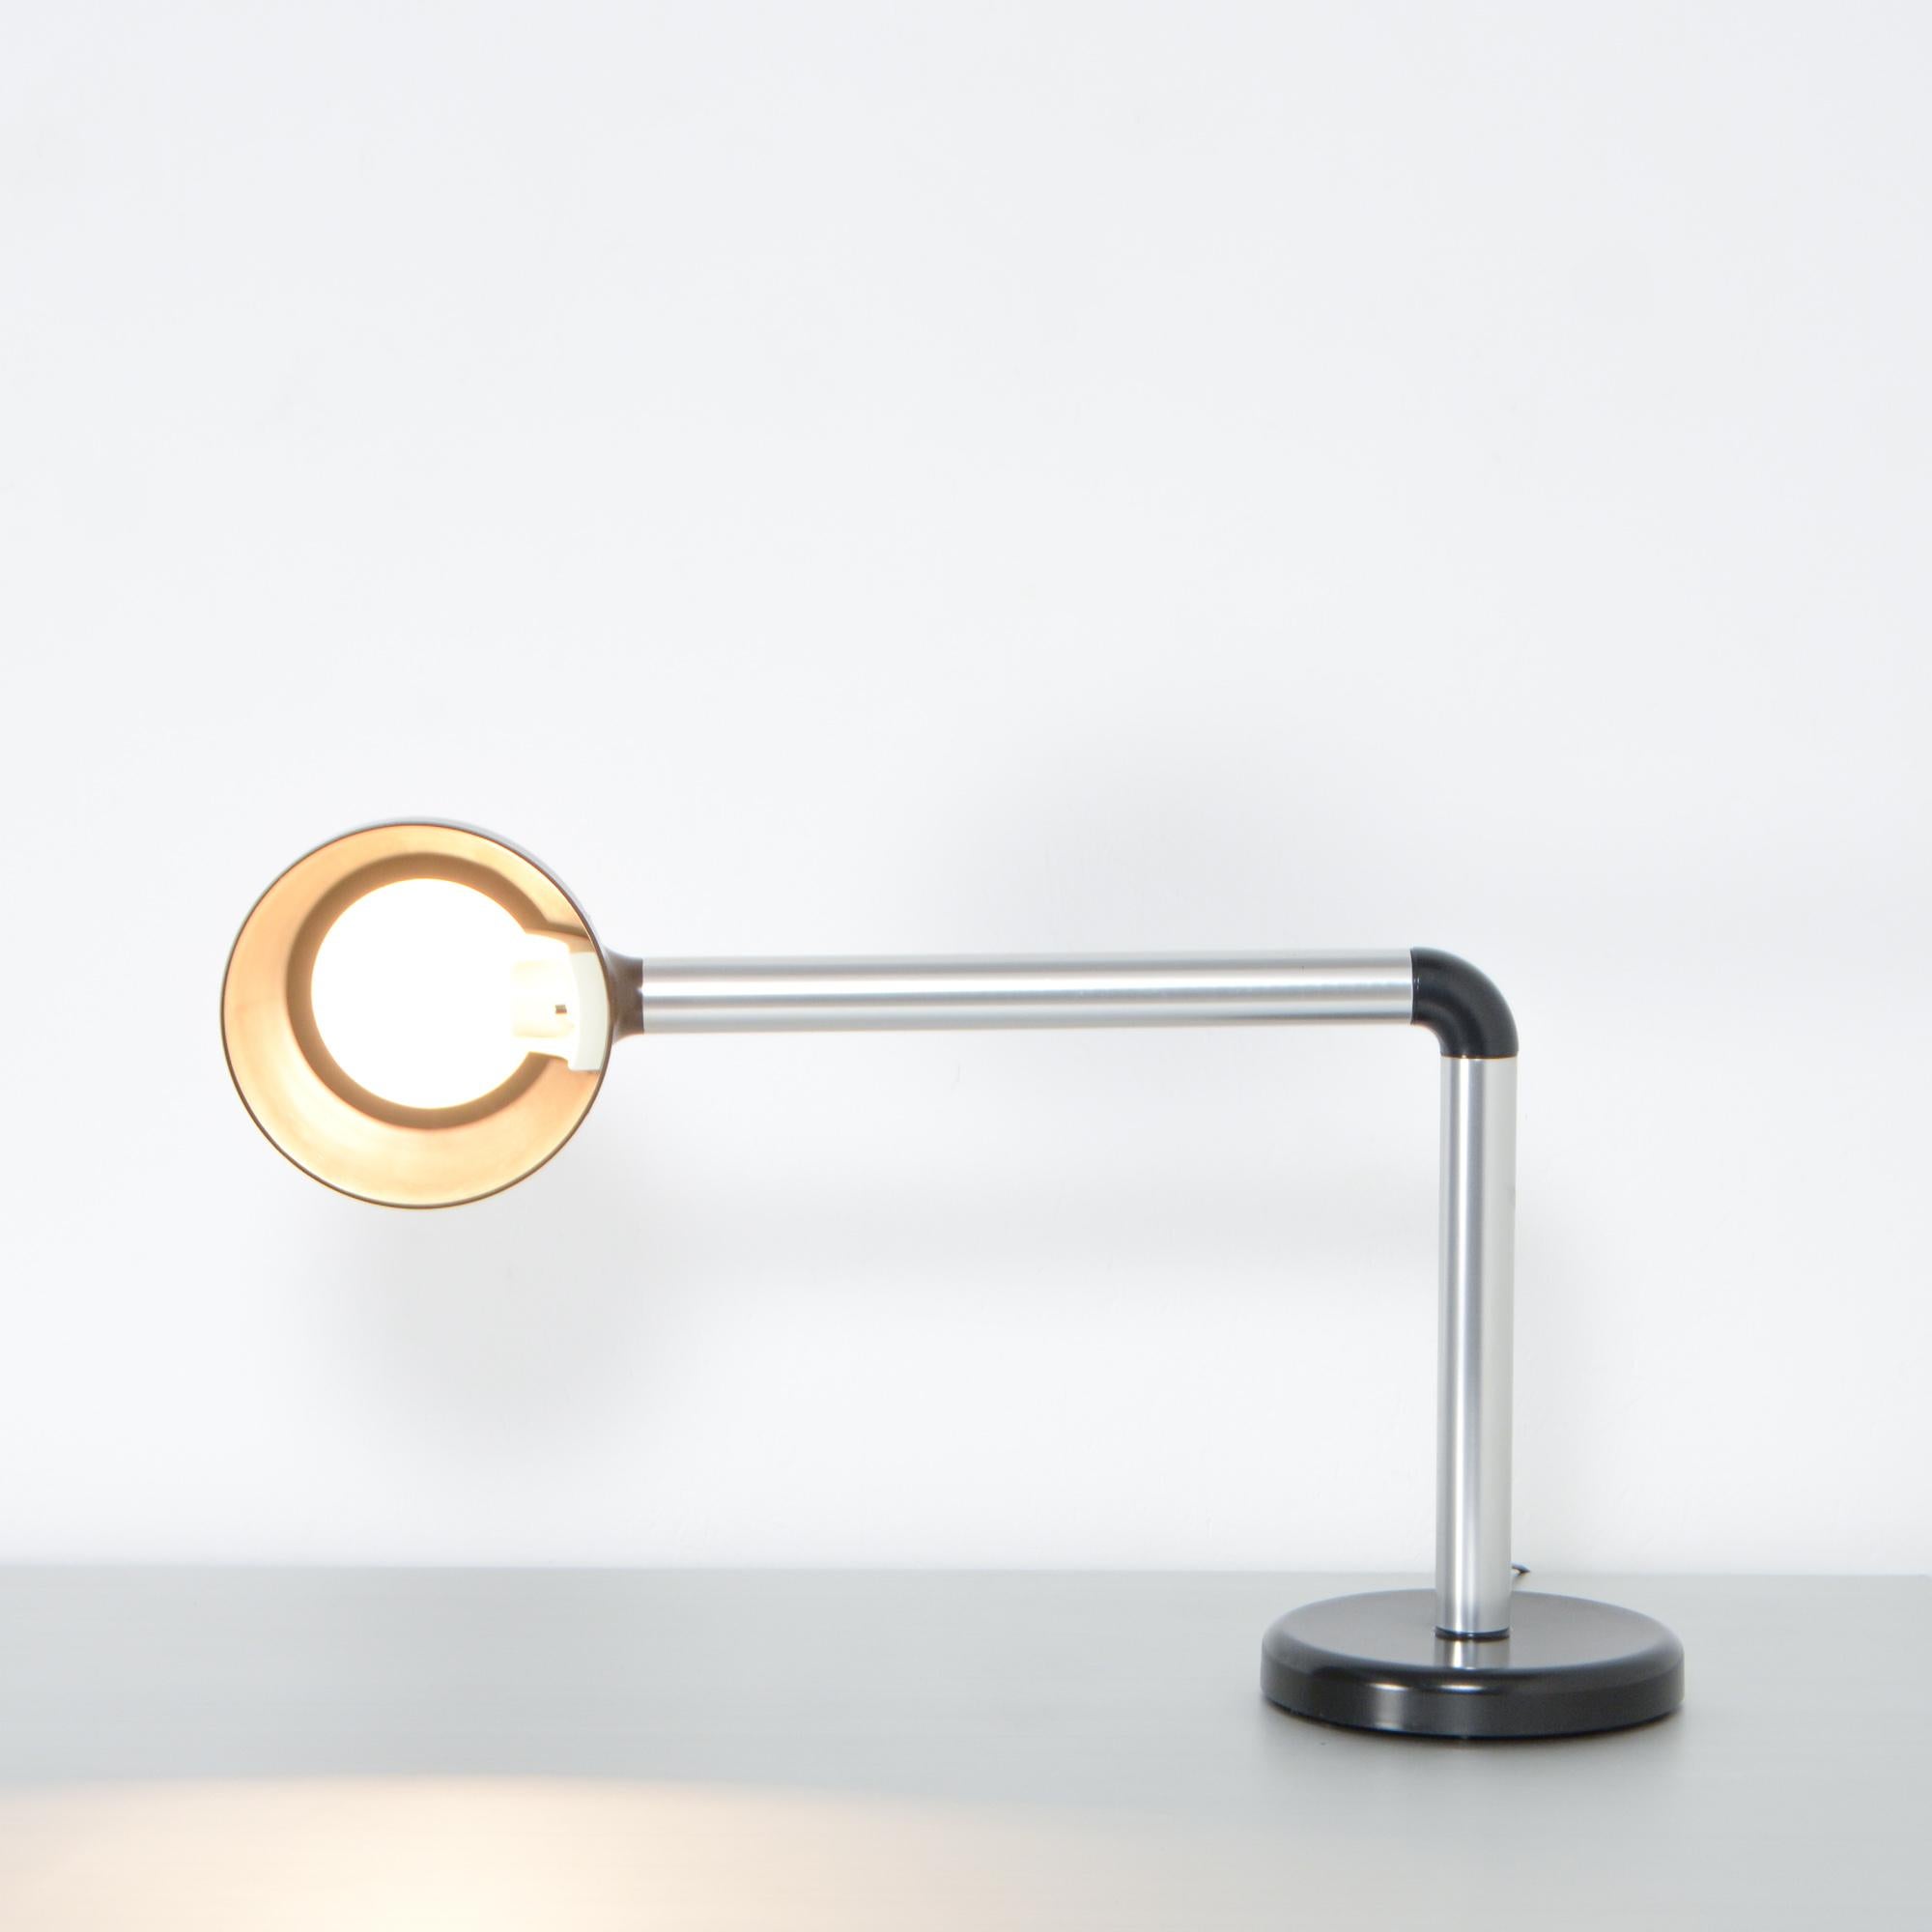 This desk lamp was designed by Robert Haussmann for Swiss Lamps International in 1965.
This great lamp is made of brushed aluminium tubes, fixed with a black plastic node. The shade is also made of black plastic.
The black heavy foot keeps the